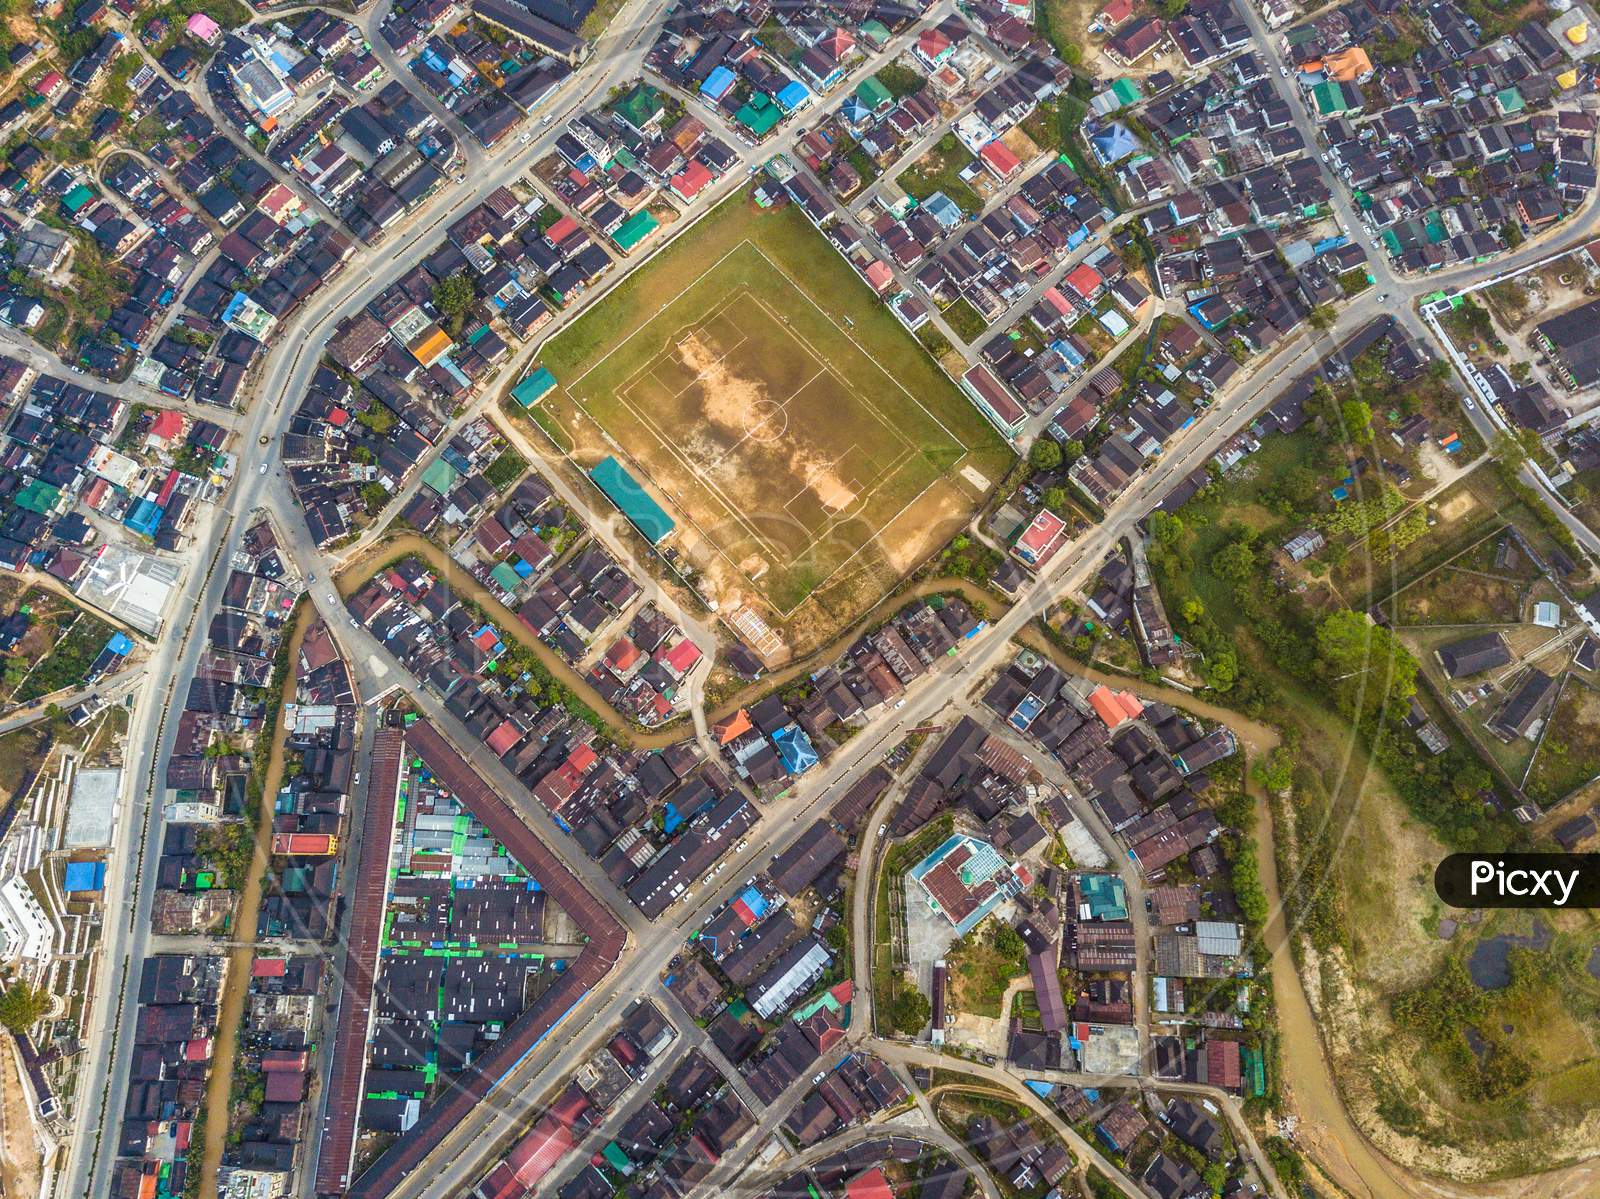 An aerial view of a playground in between an urban area